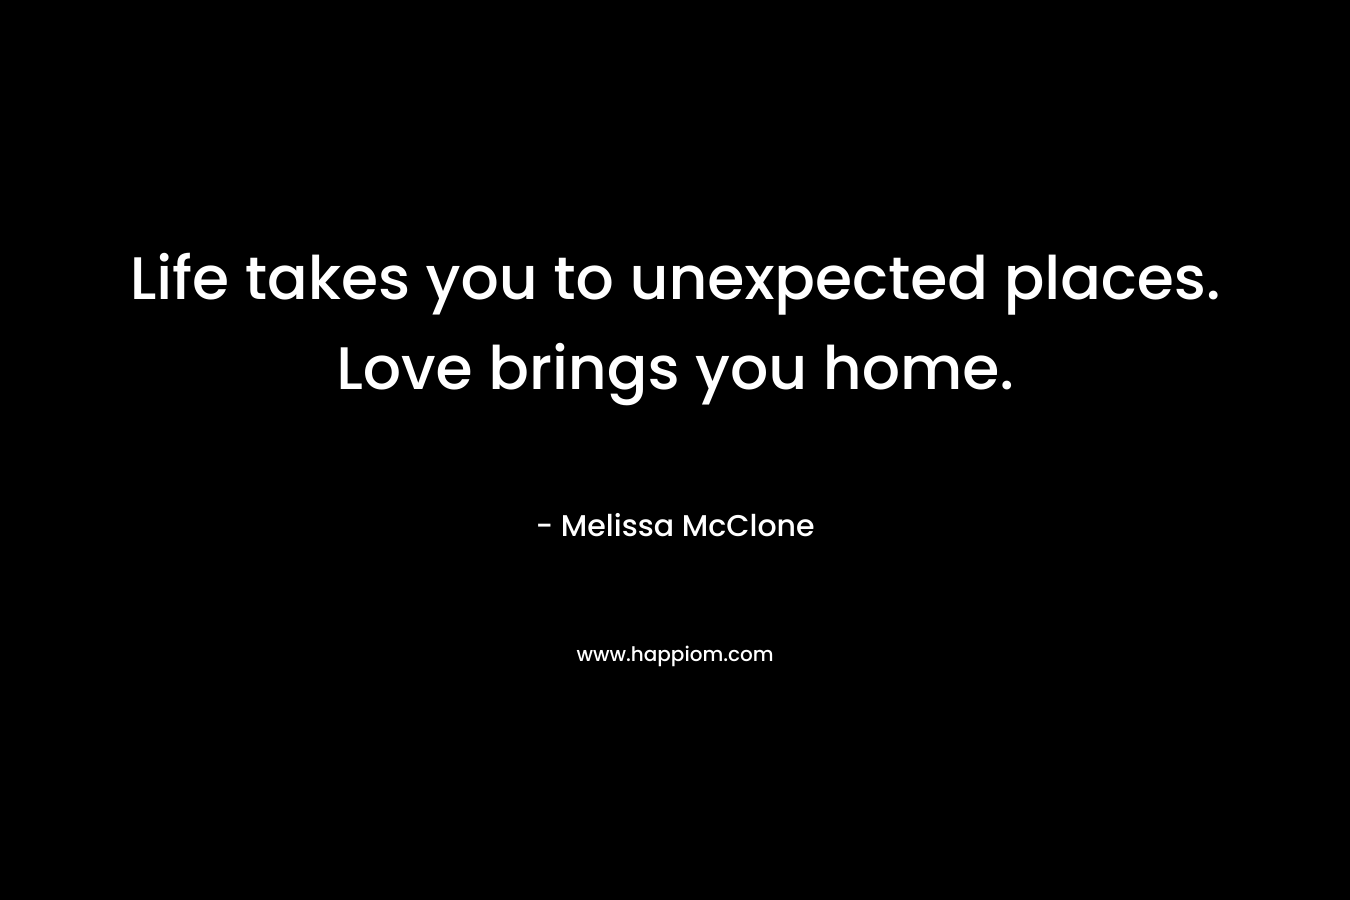 Life takes you to unexpected places. Love brings you home. – Melissa McClone